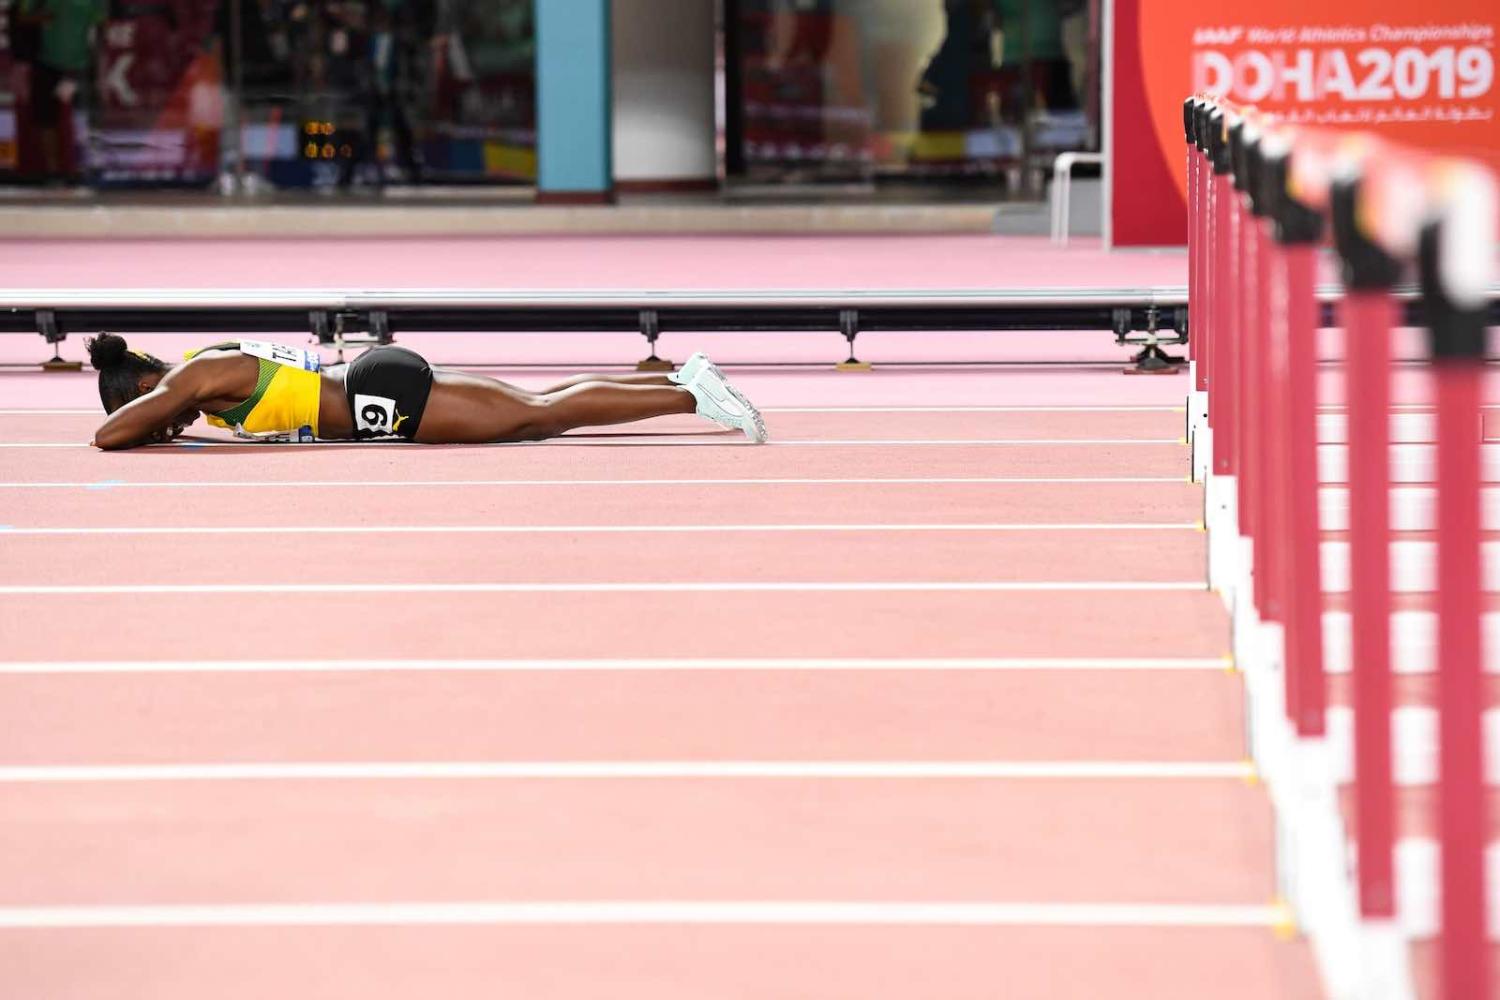 Jamaica's Megan Tapper following the women’s 100-metre hurdles final in Doha on 6 October 2019 (Photo by Kirill Kudryavtsev/AFP/Getty Images)